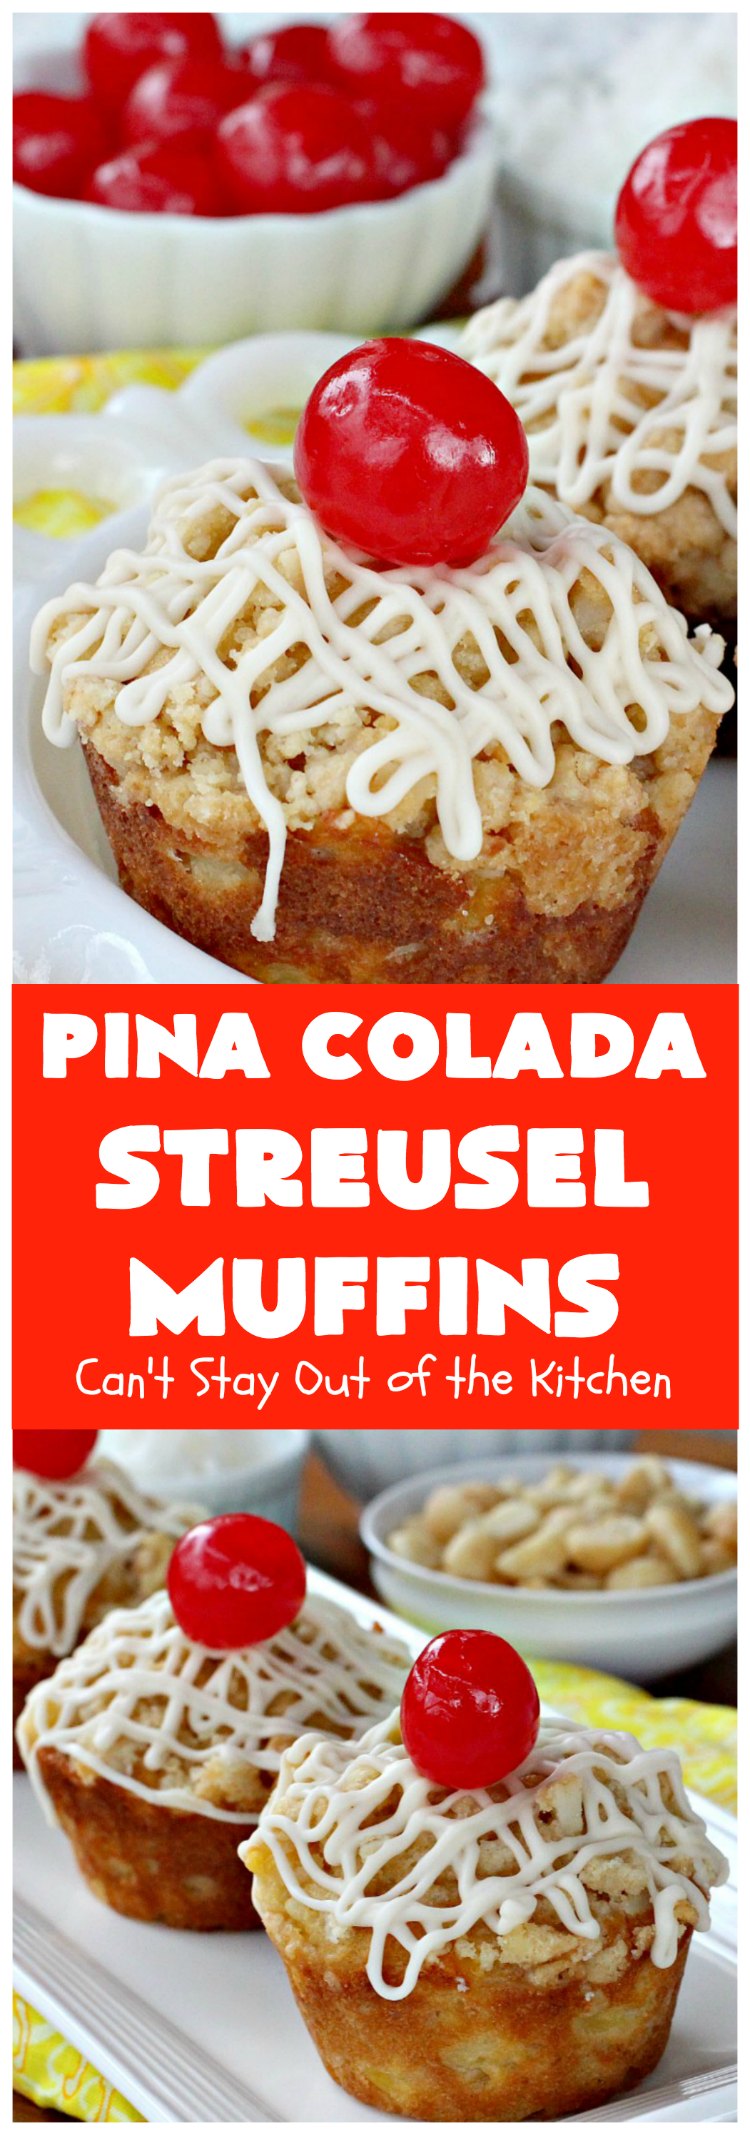 Pina Colada Streusel Muffins | Can't Stay Out of the Kitchen